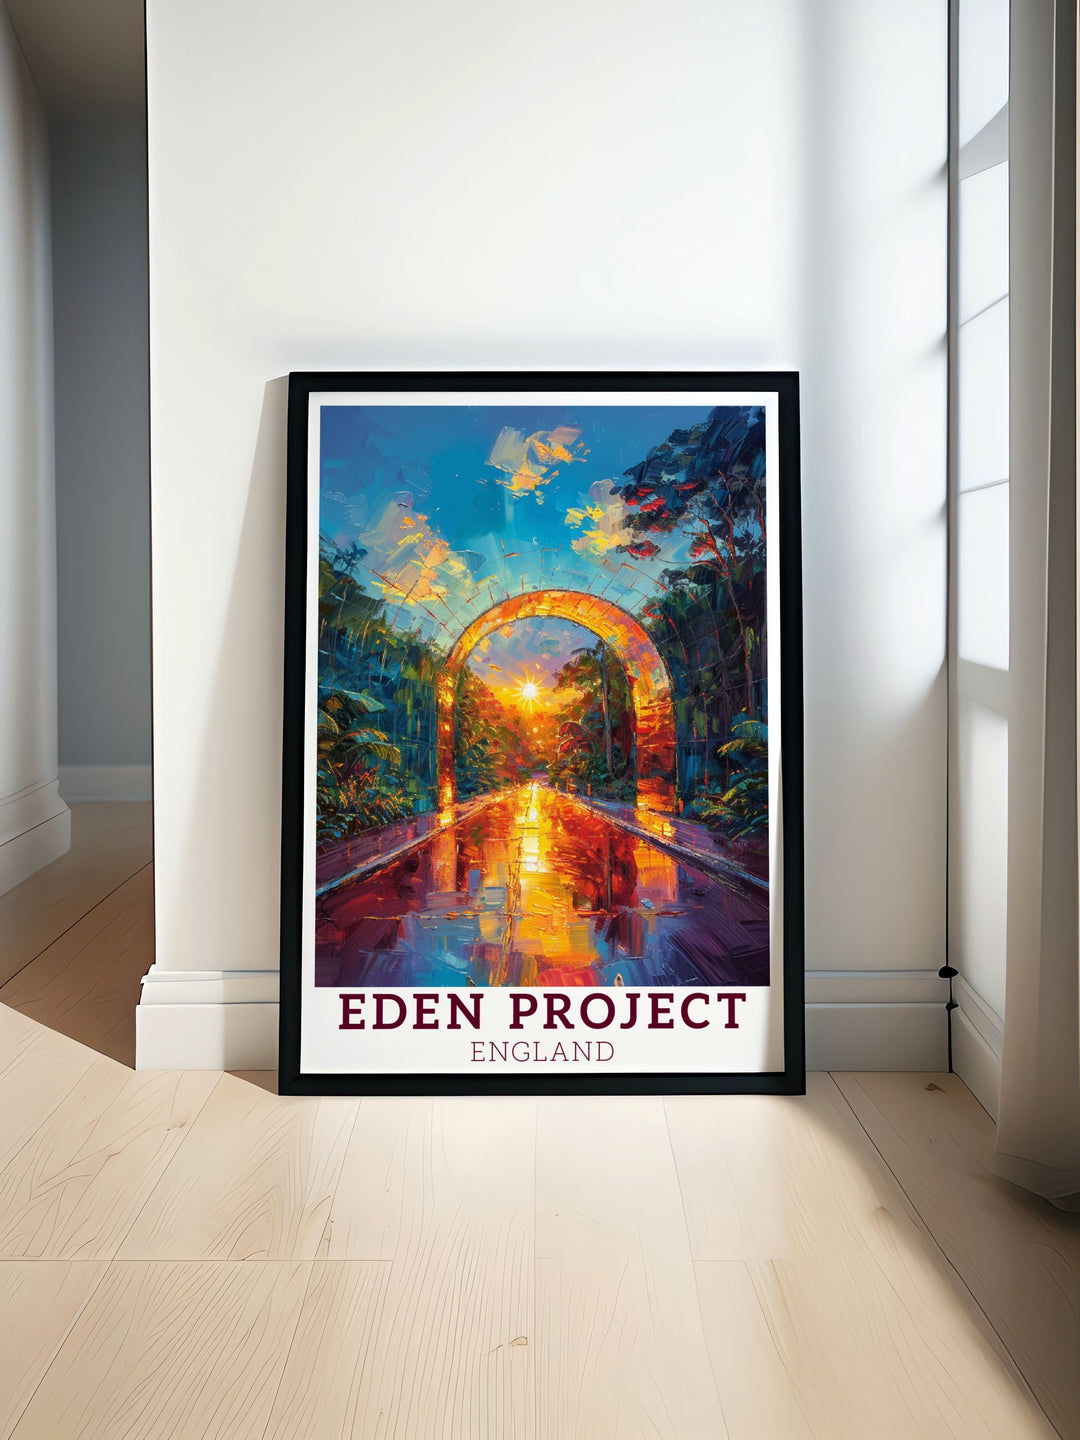 Eden Project wall art featuring the iconic biodomes and lush gardens perfect for bringing a touch of nature into your home decor an ideal piece for nature lovers and those who appreciate innovative botanical displays this art captures the beauty of the Eden Project.